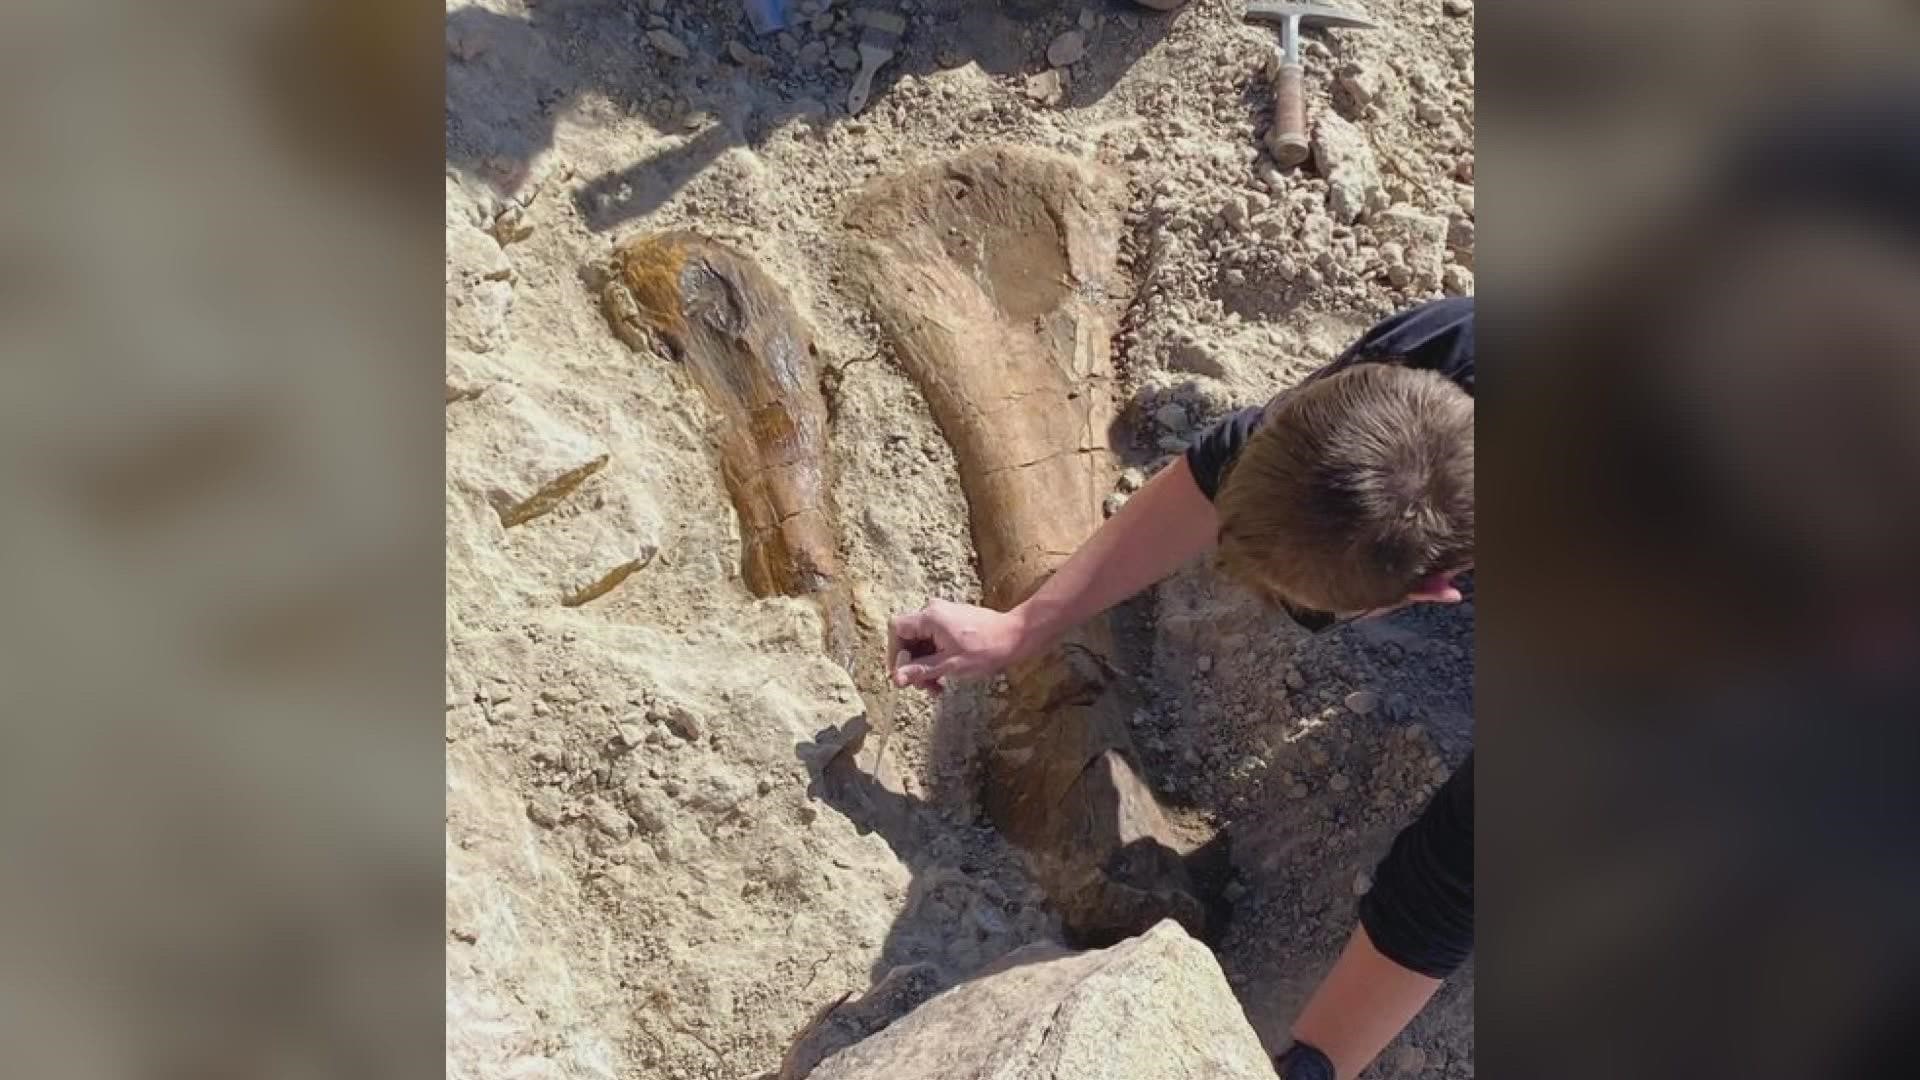 A member of the public found the tibia and fibula that belonged to a large-bodied herbivore dinosaur.